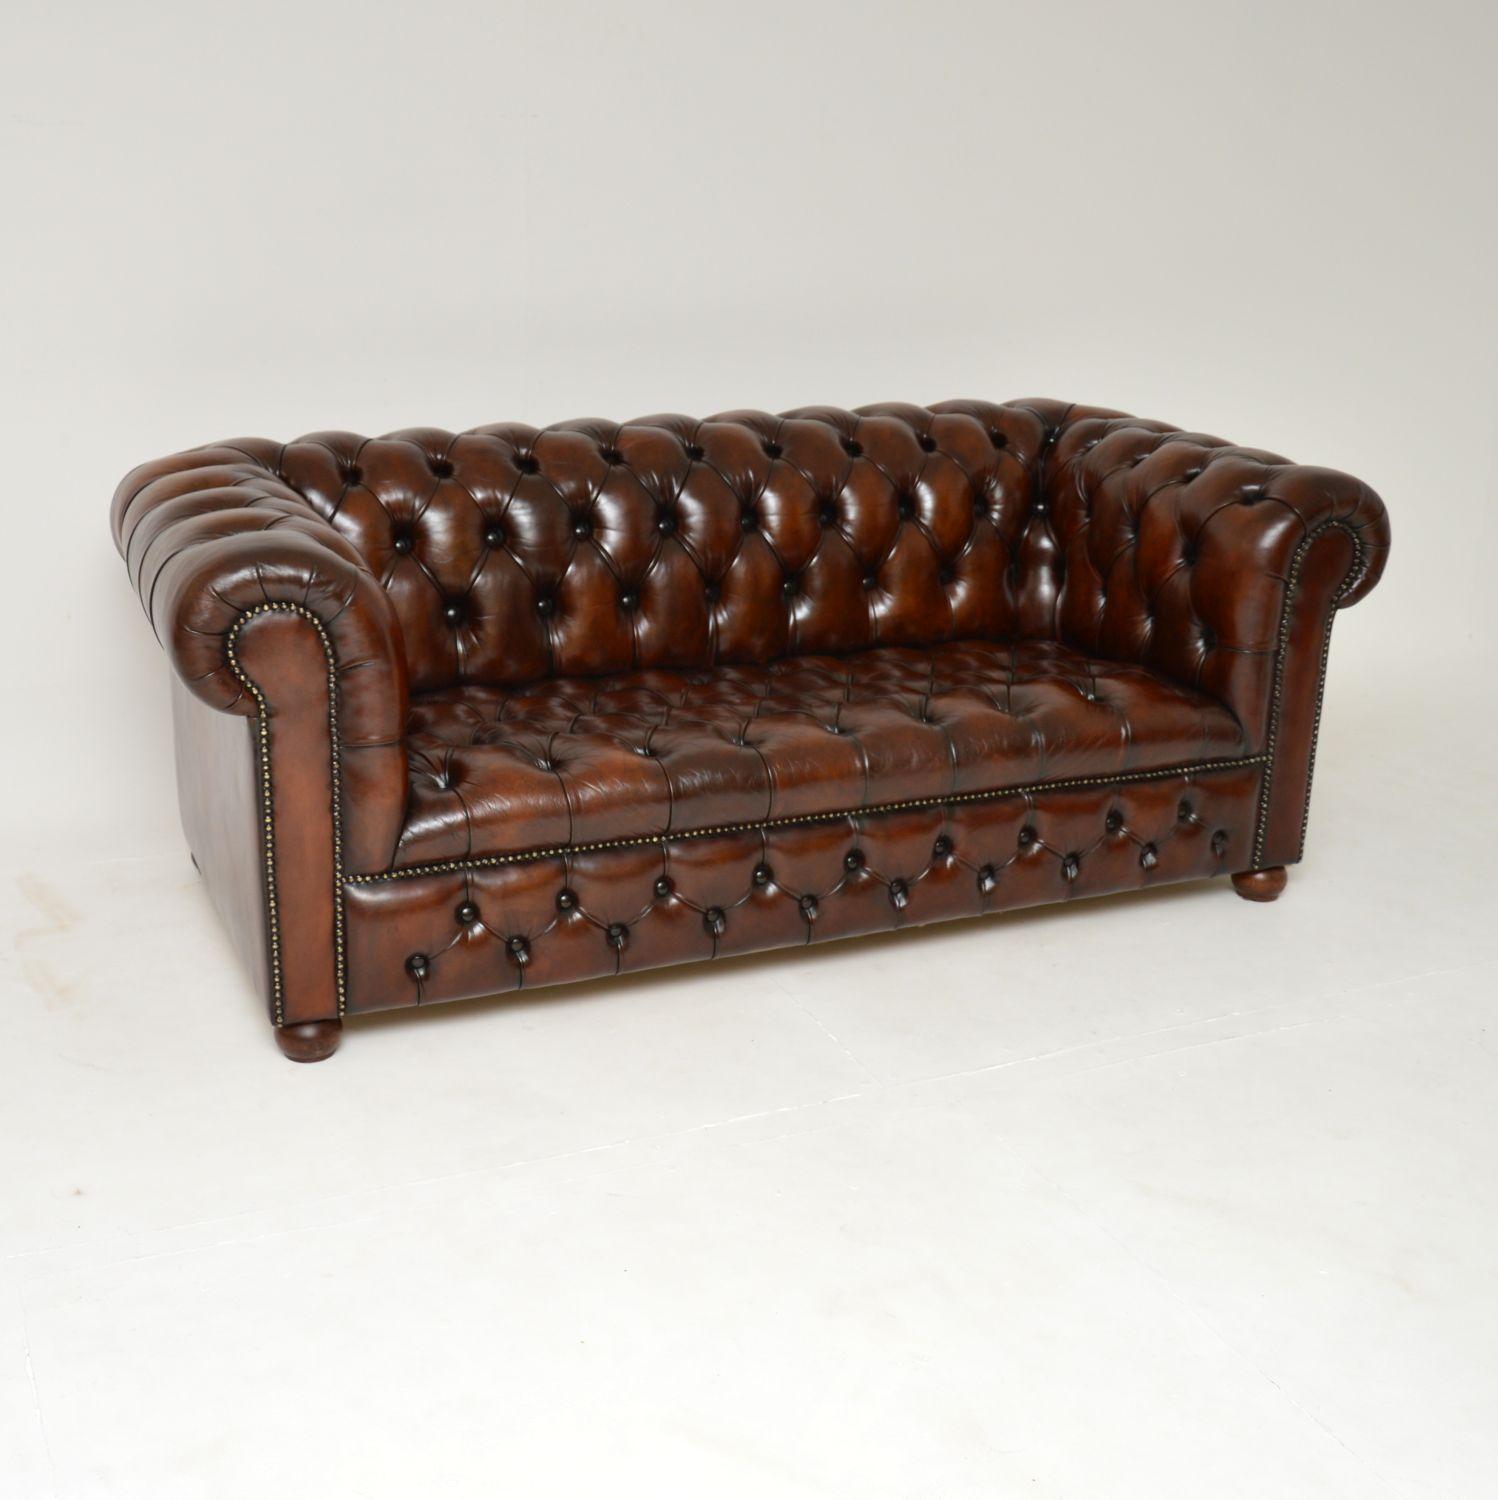 English Pair of Antique Leather Chesterfield Sofas